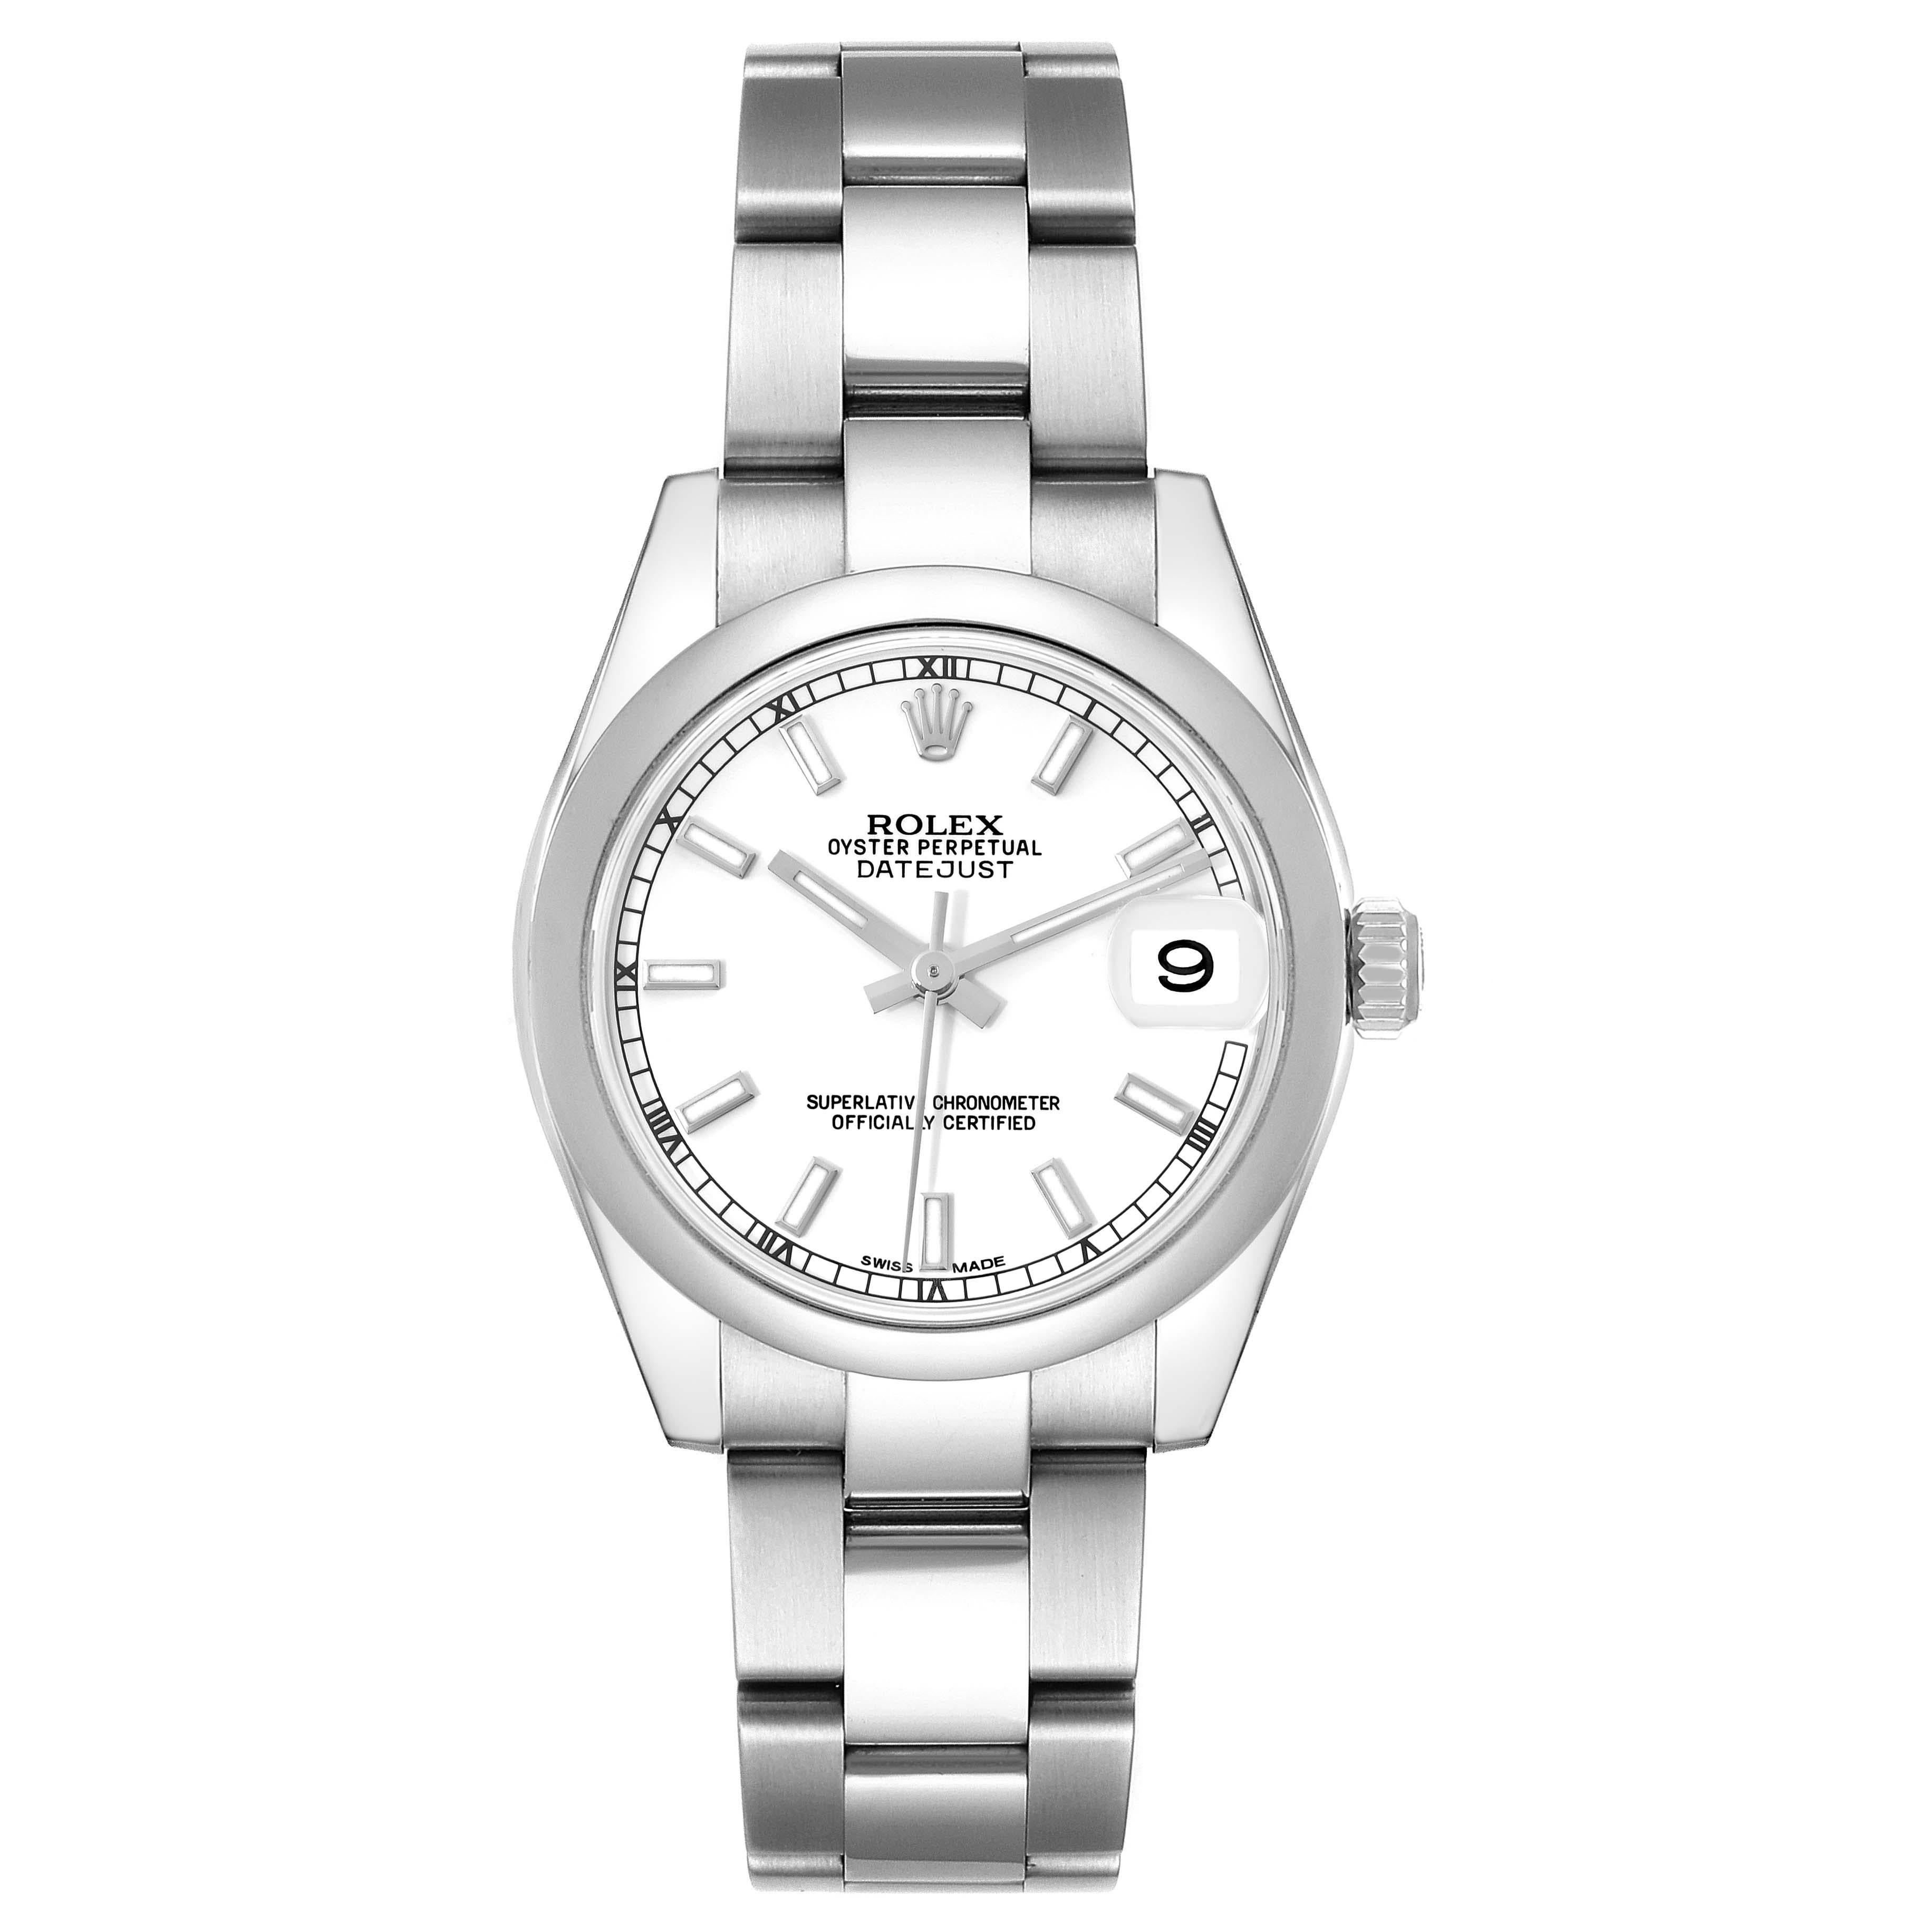 Rolex Datejust Midsize White Dial Steel Ladies Watch 178240. Officially certified chronometer self-winding movement with quickset date function. Stainless steel oyster case 31.0 mm in diameter. Rolex logo on a crown. Stainless steel smooth bezel.